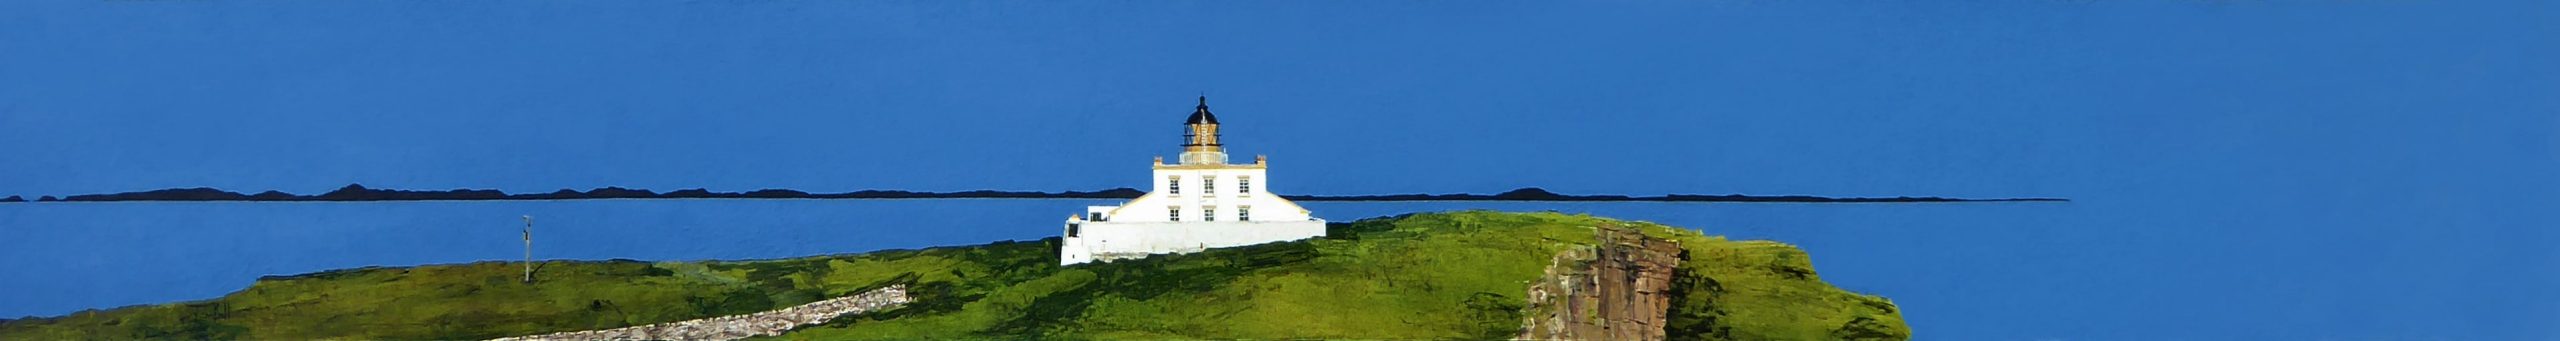 Lewis and Harris from Stoer Lighthouse (size 60 x 8 inches)-min